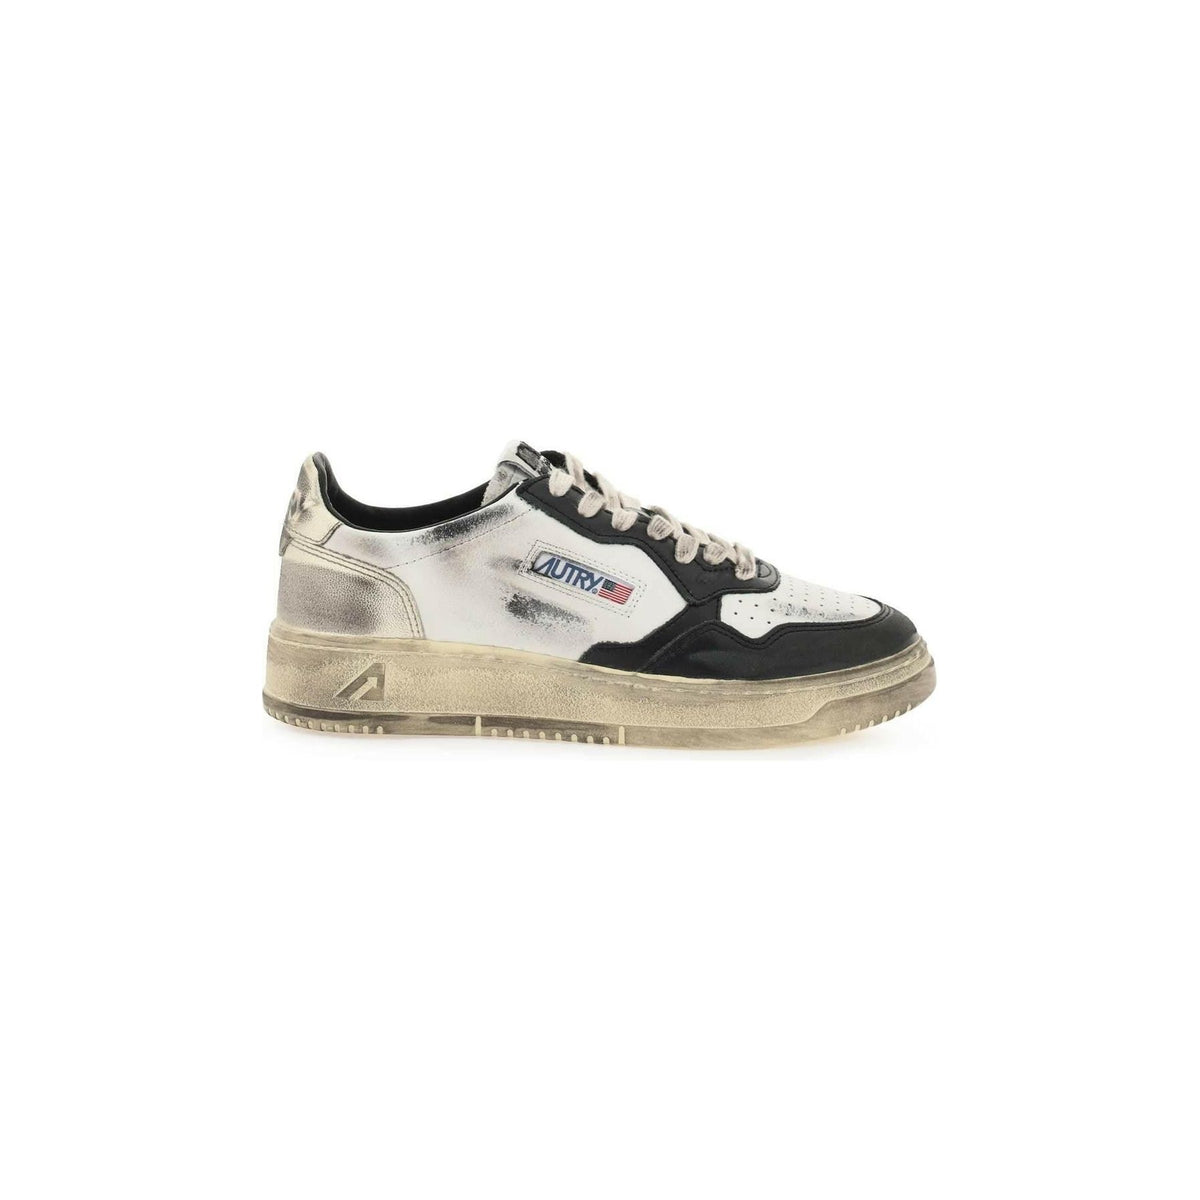 AUTRY - White and Black Medalist Low Super Vintage Sneakers - JOHN JULIA